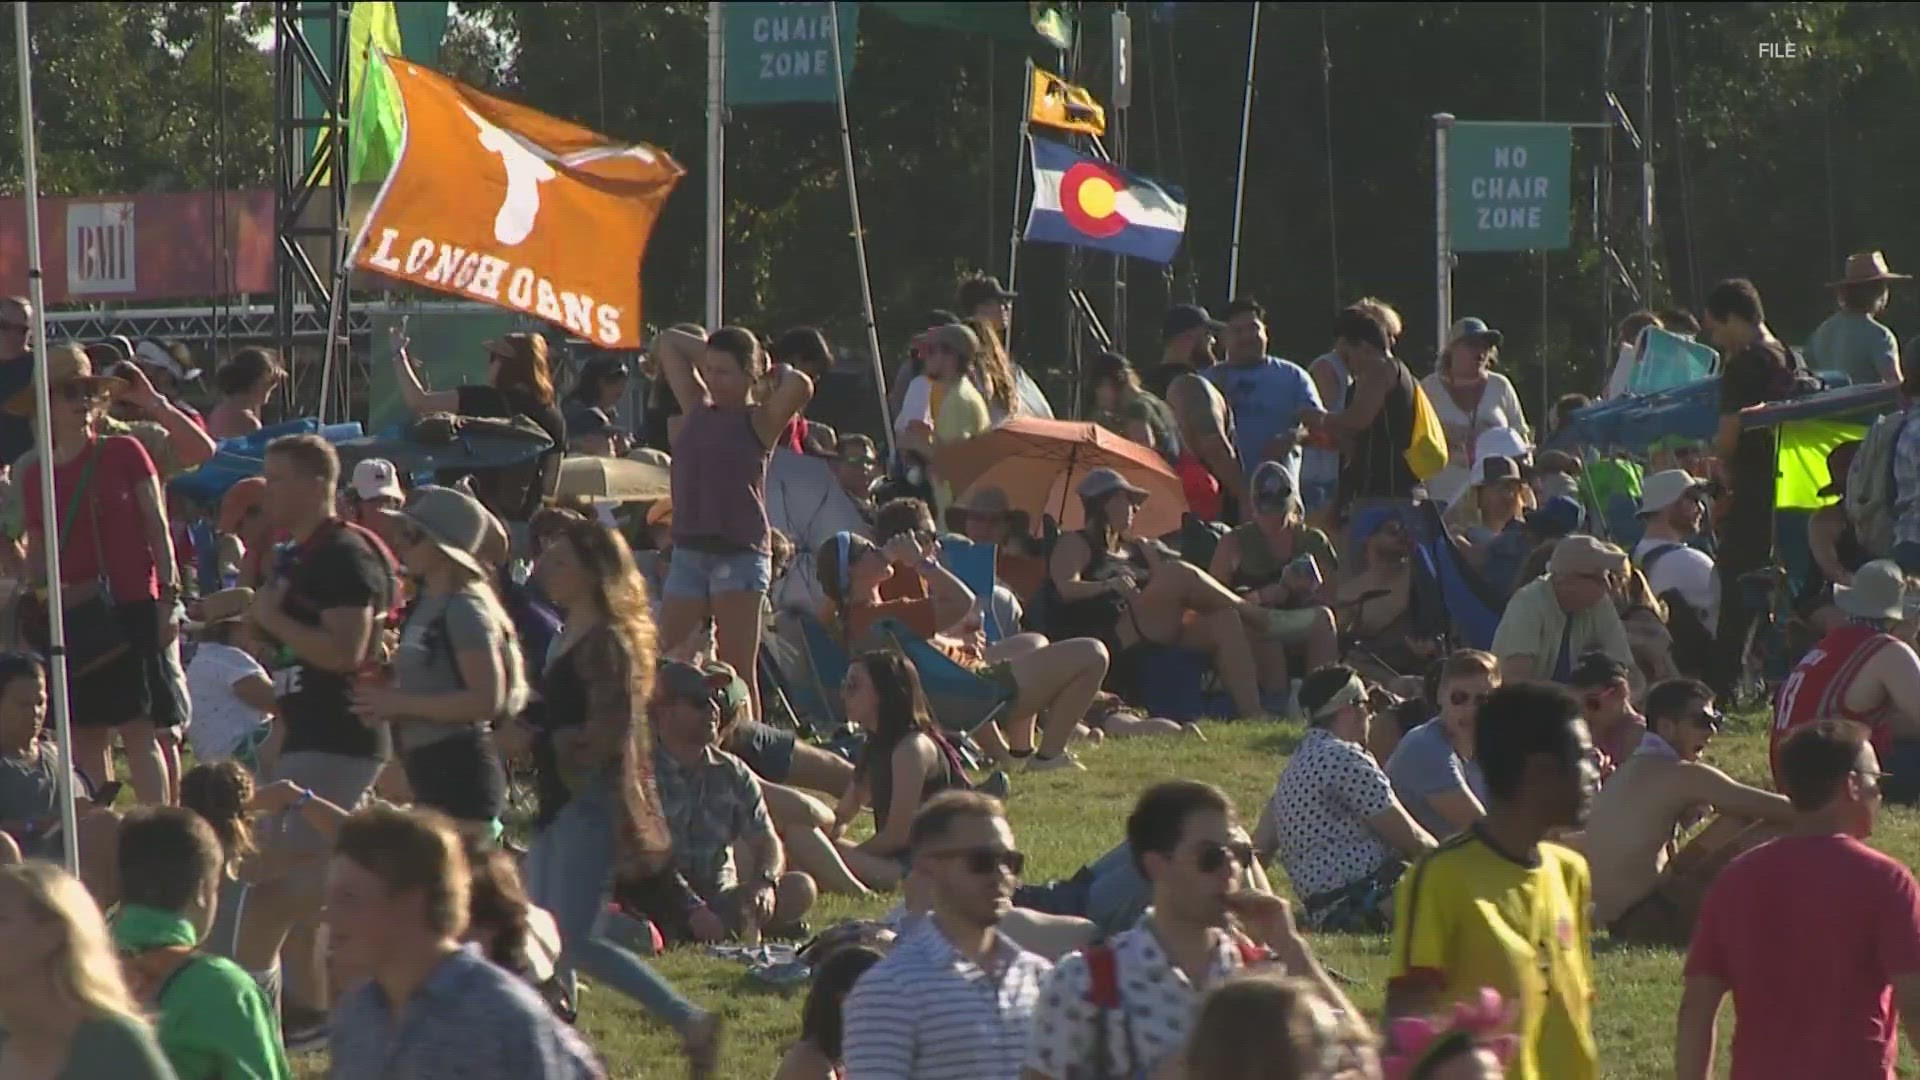 The city is getting ready for the Austin City Limits Music Festival, and that means you can expect closures around Zilker Park.